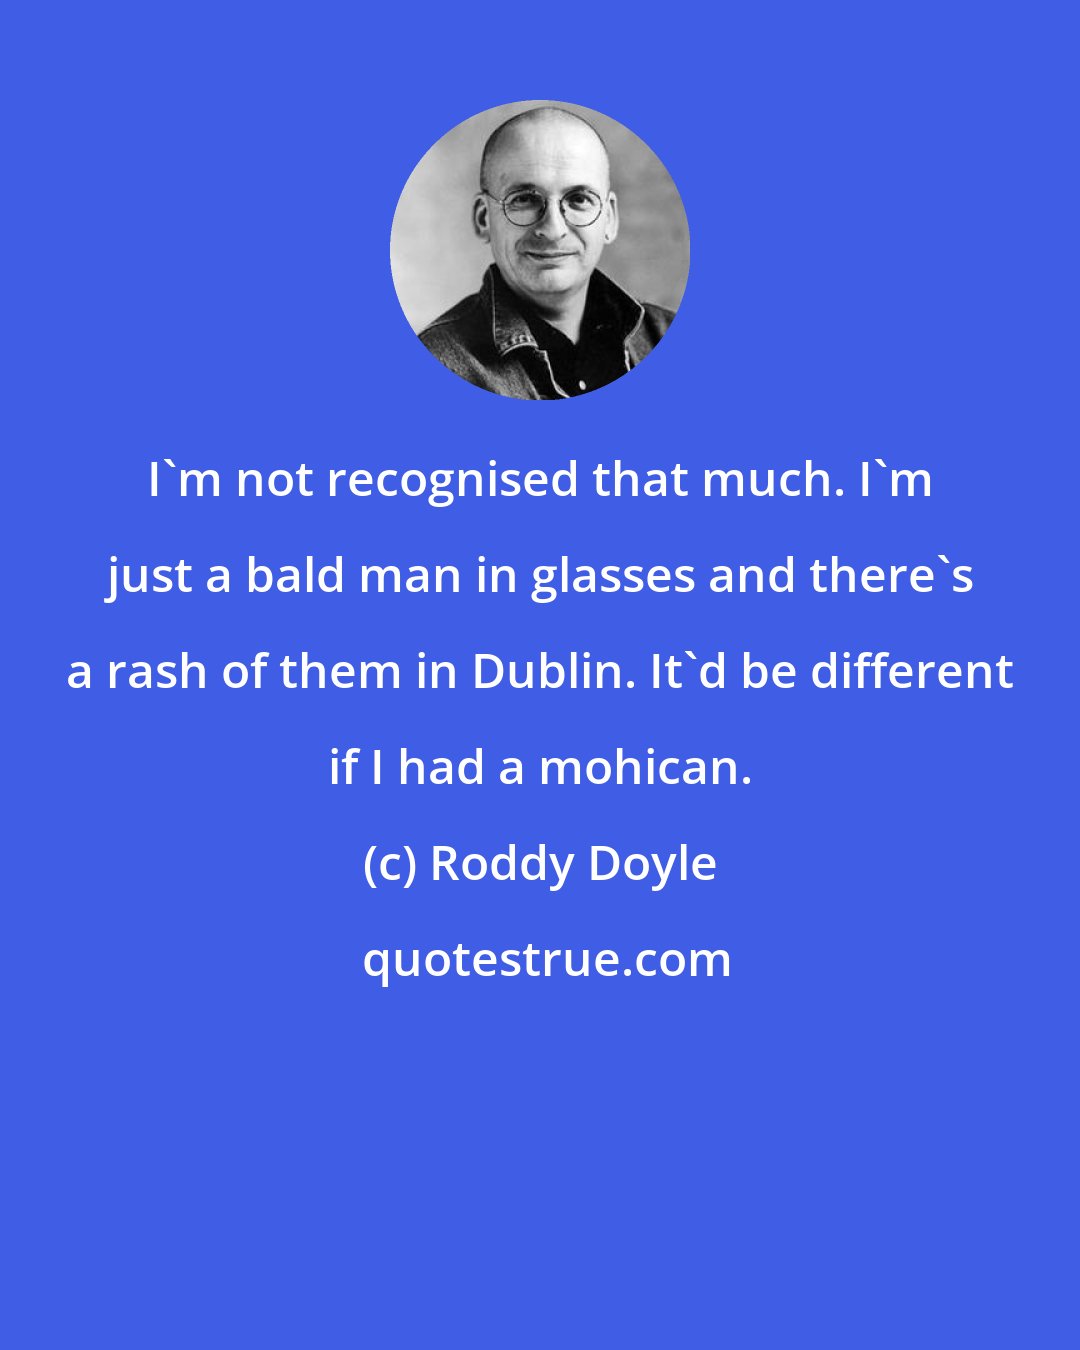 Roddy Doyle: I'm not recognised that much. I'm just a bald man in glasses and there's a rash of them in Dublin. It'd be different if I had a mohican.